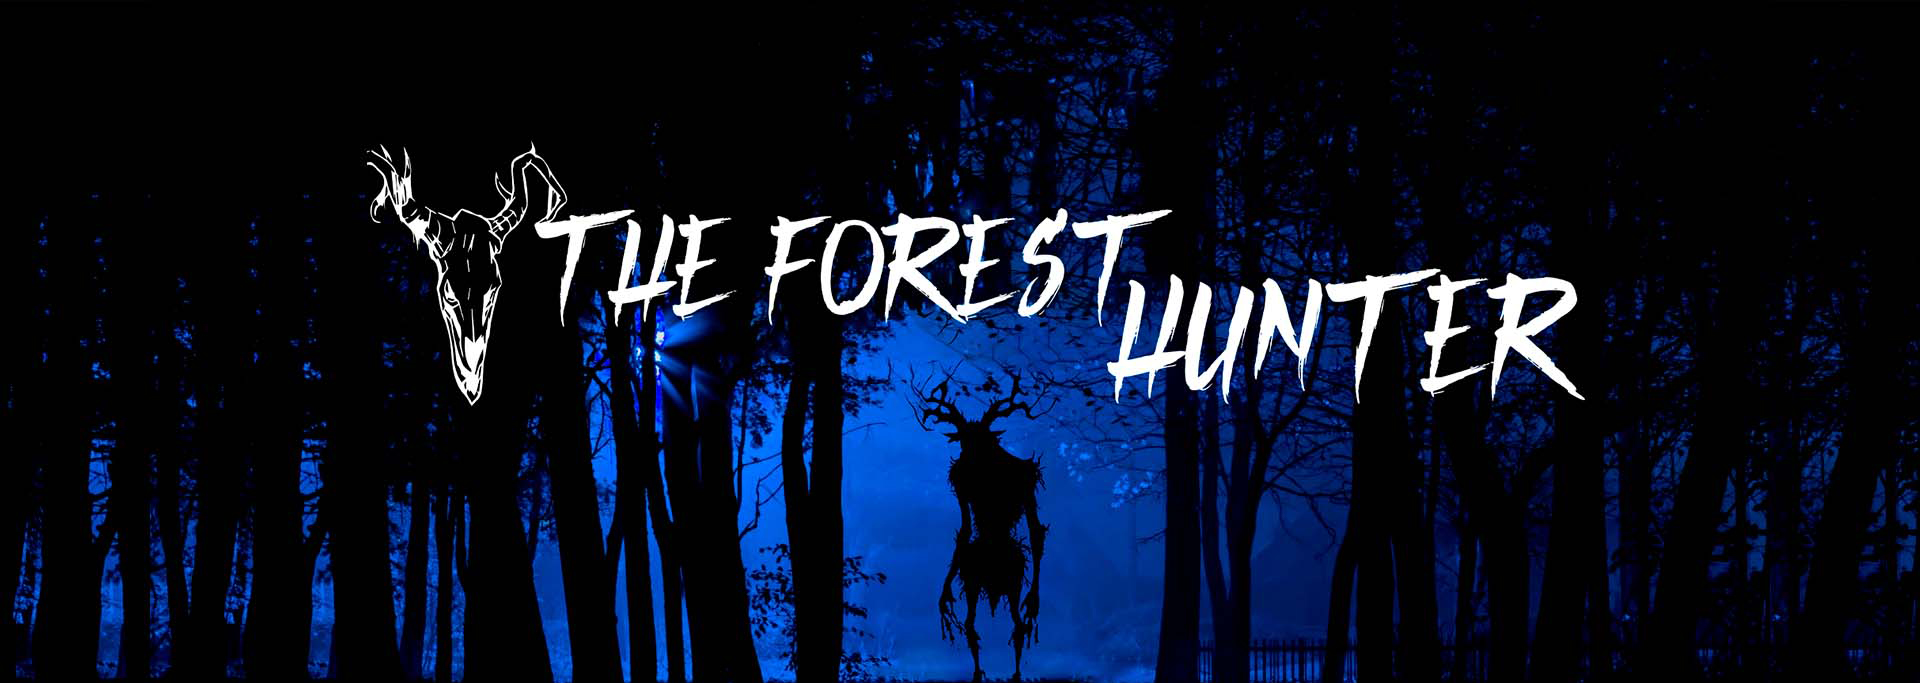 The Forest Hunter Demo